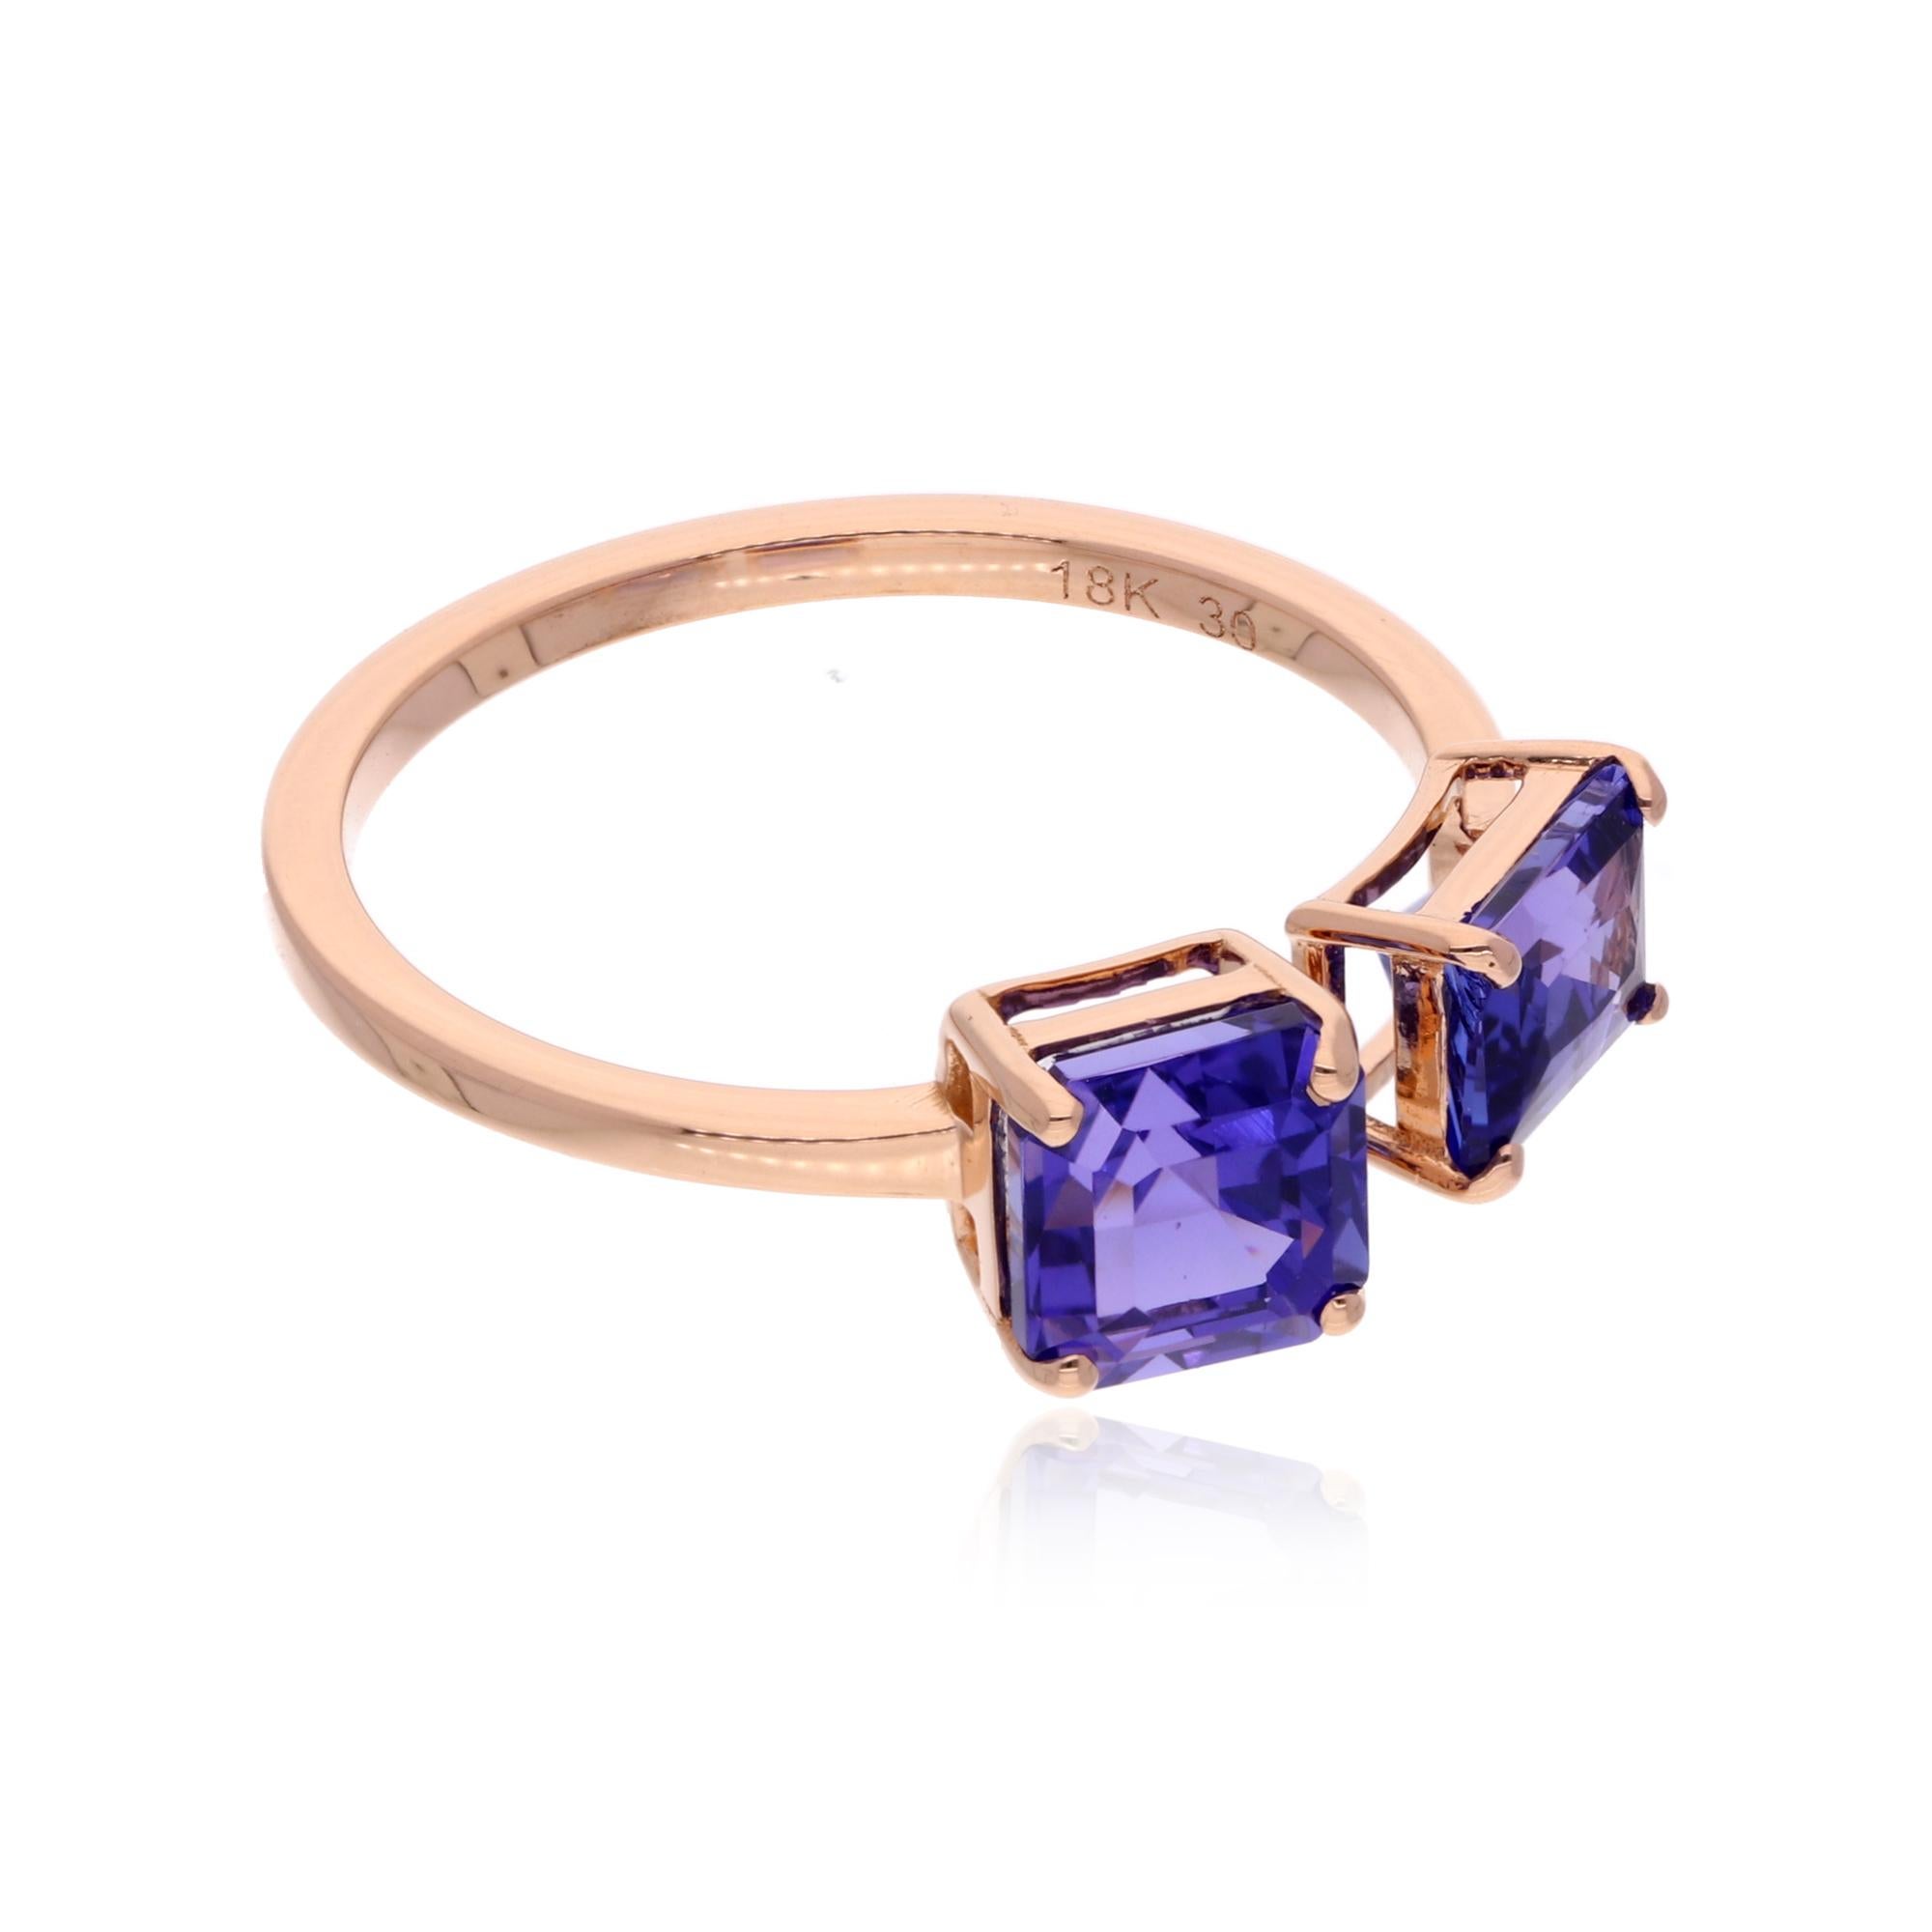 Item Code :- SER-22356 (14k)
Gross Weight :- 2.19 grams
14k Solid Rose Gold Weight :- 1.66 grams
Tanzanite Weight :- 2.64 Carat
Ring Size :- 7 US & All size available

✦ Sizing
.....................
We can adjust most items to fit your sizing